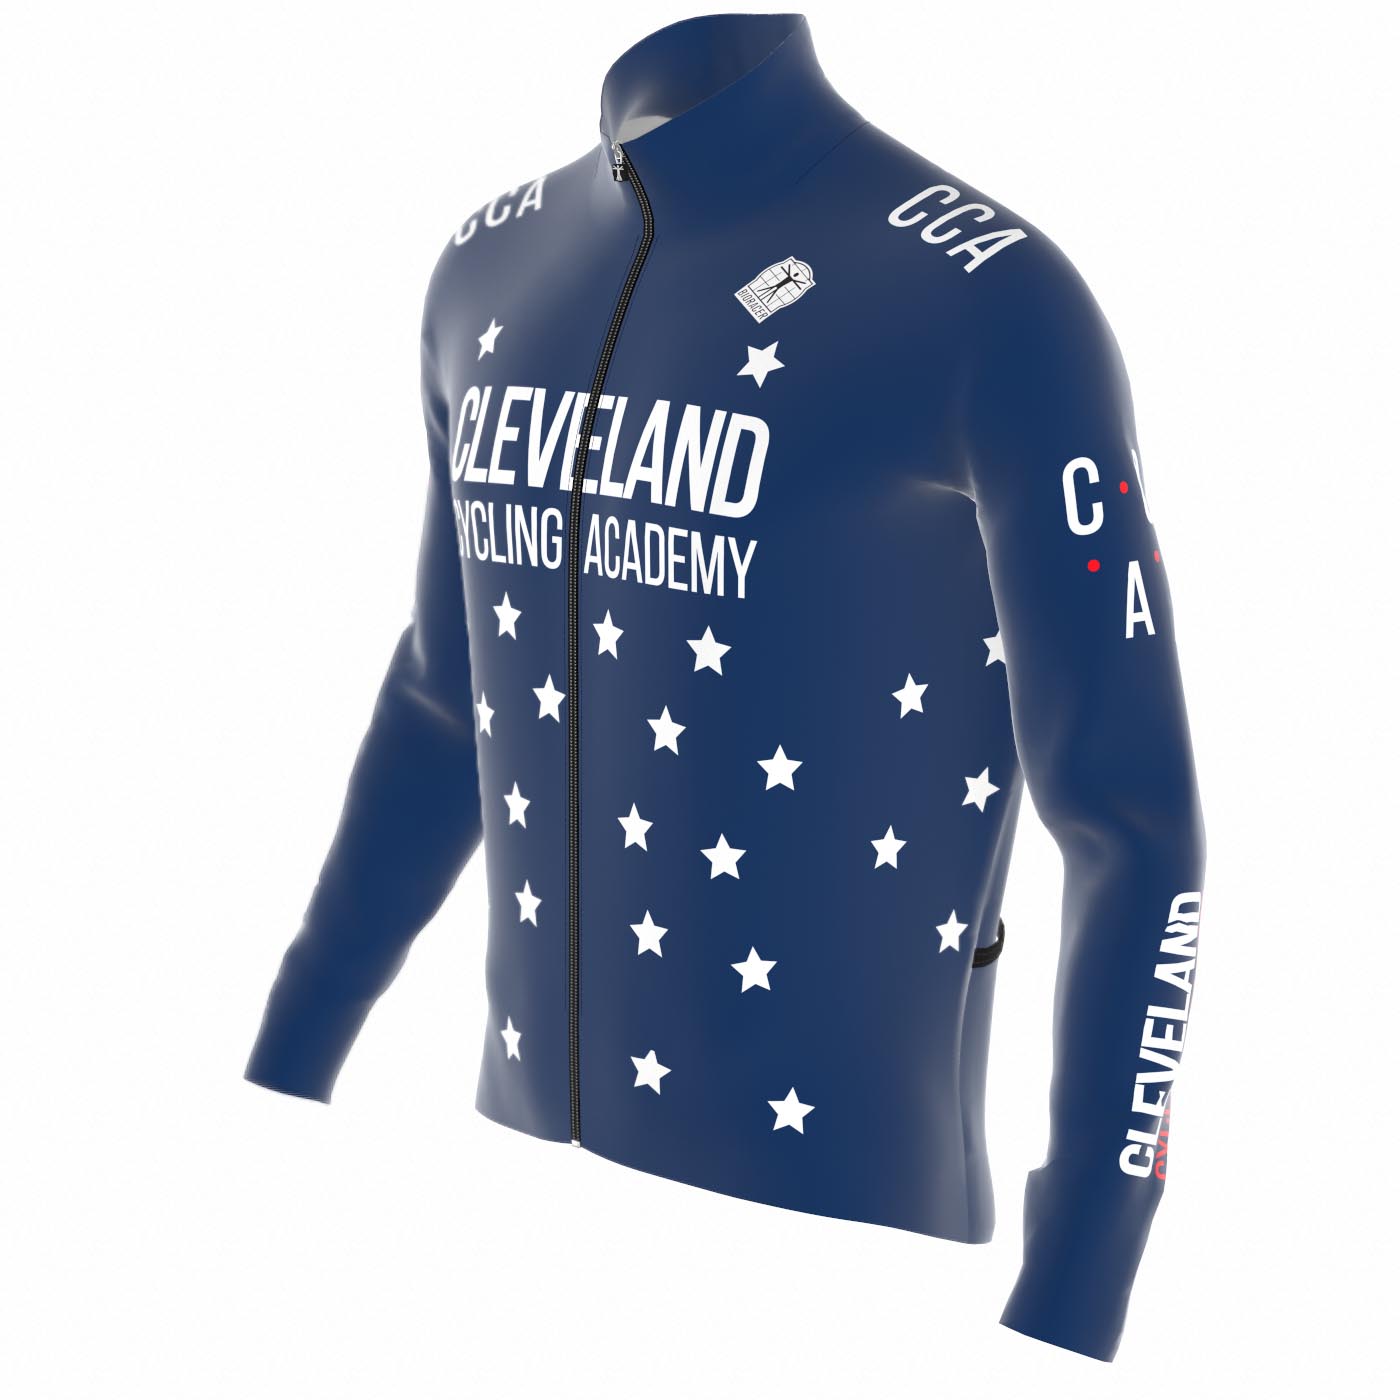 Epic Tempest Light Thermal Long Sleeve Jersey - Women